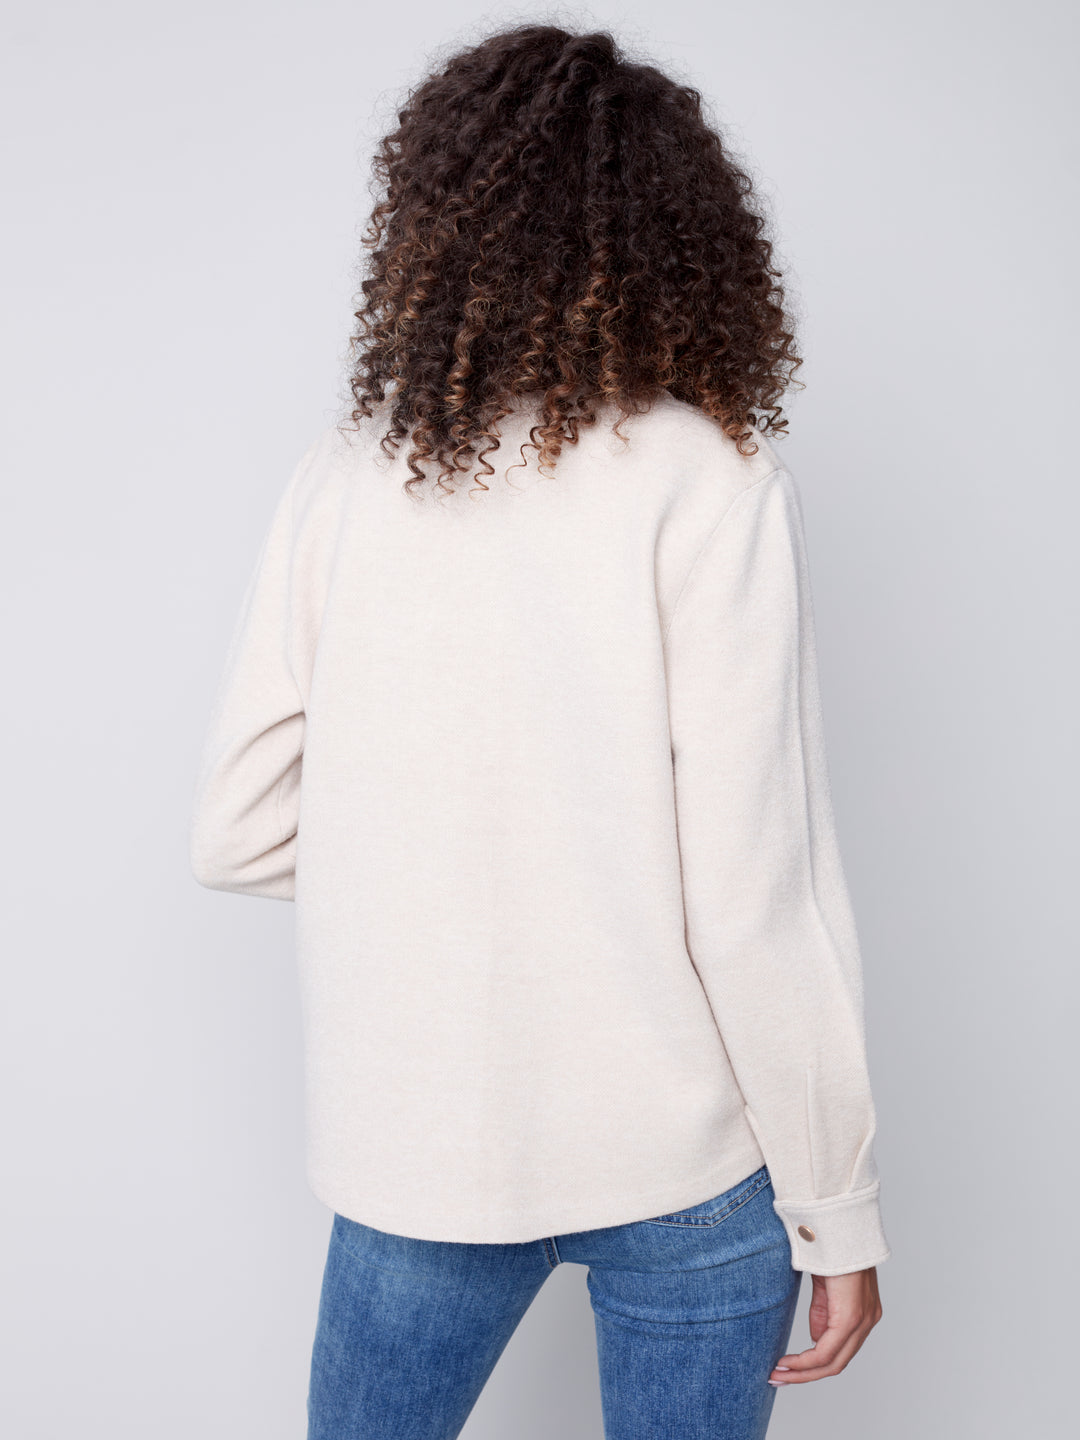 Knit Long Sleeve Button Up Top